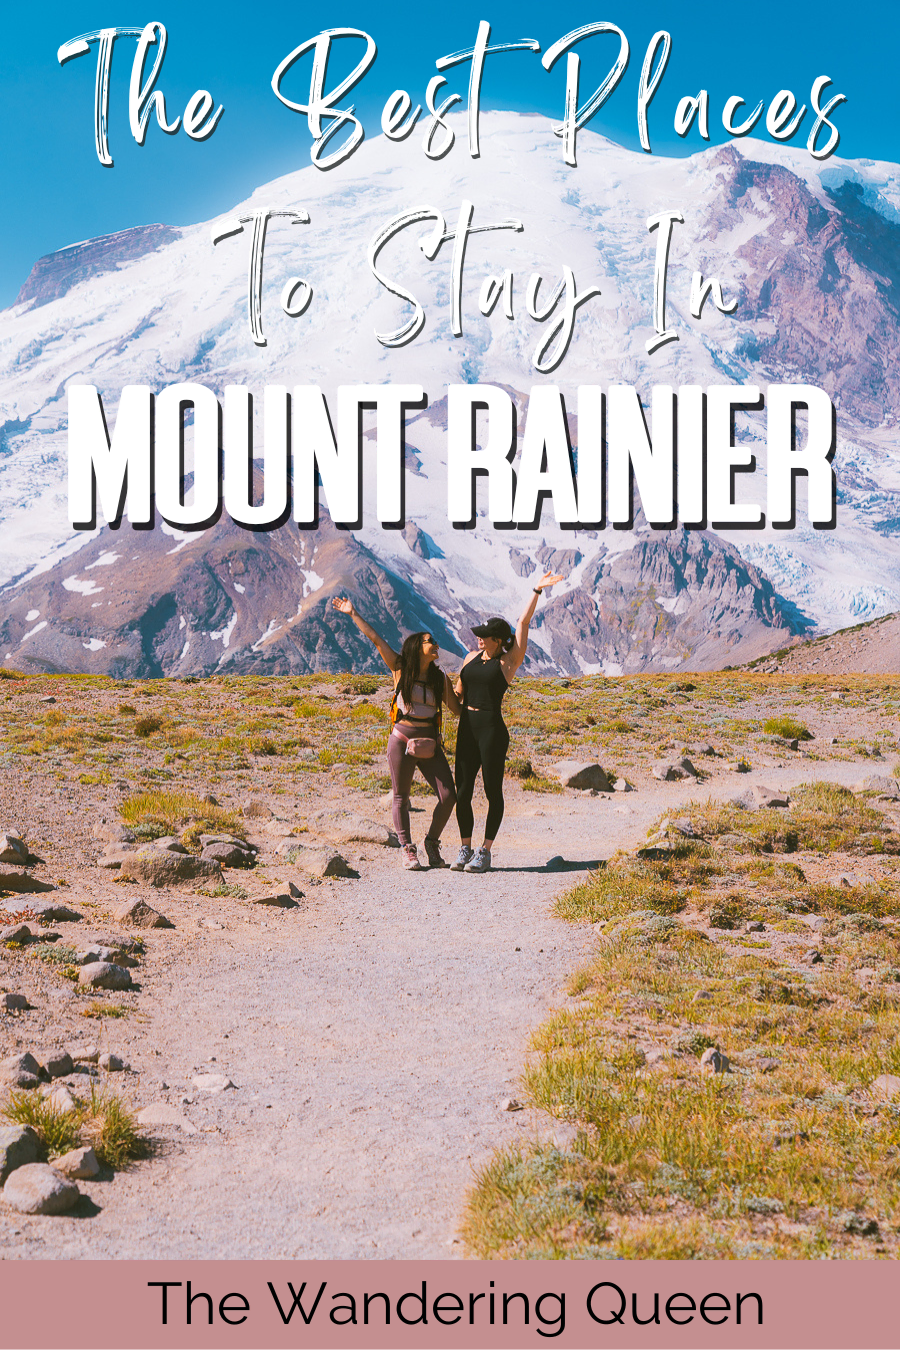 Where To Stay In Mt Rainier National Park